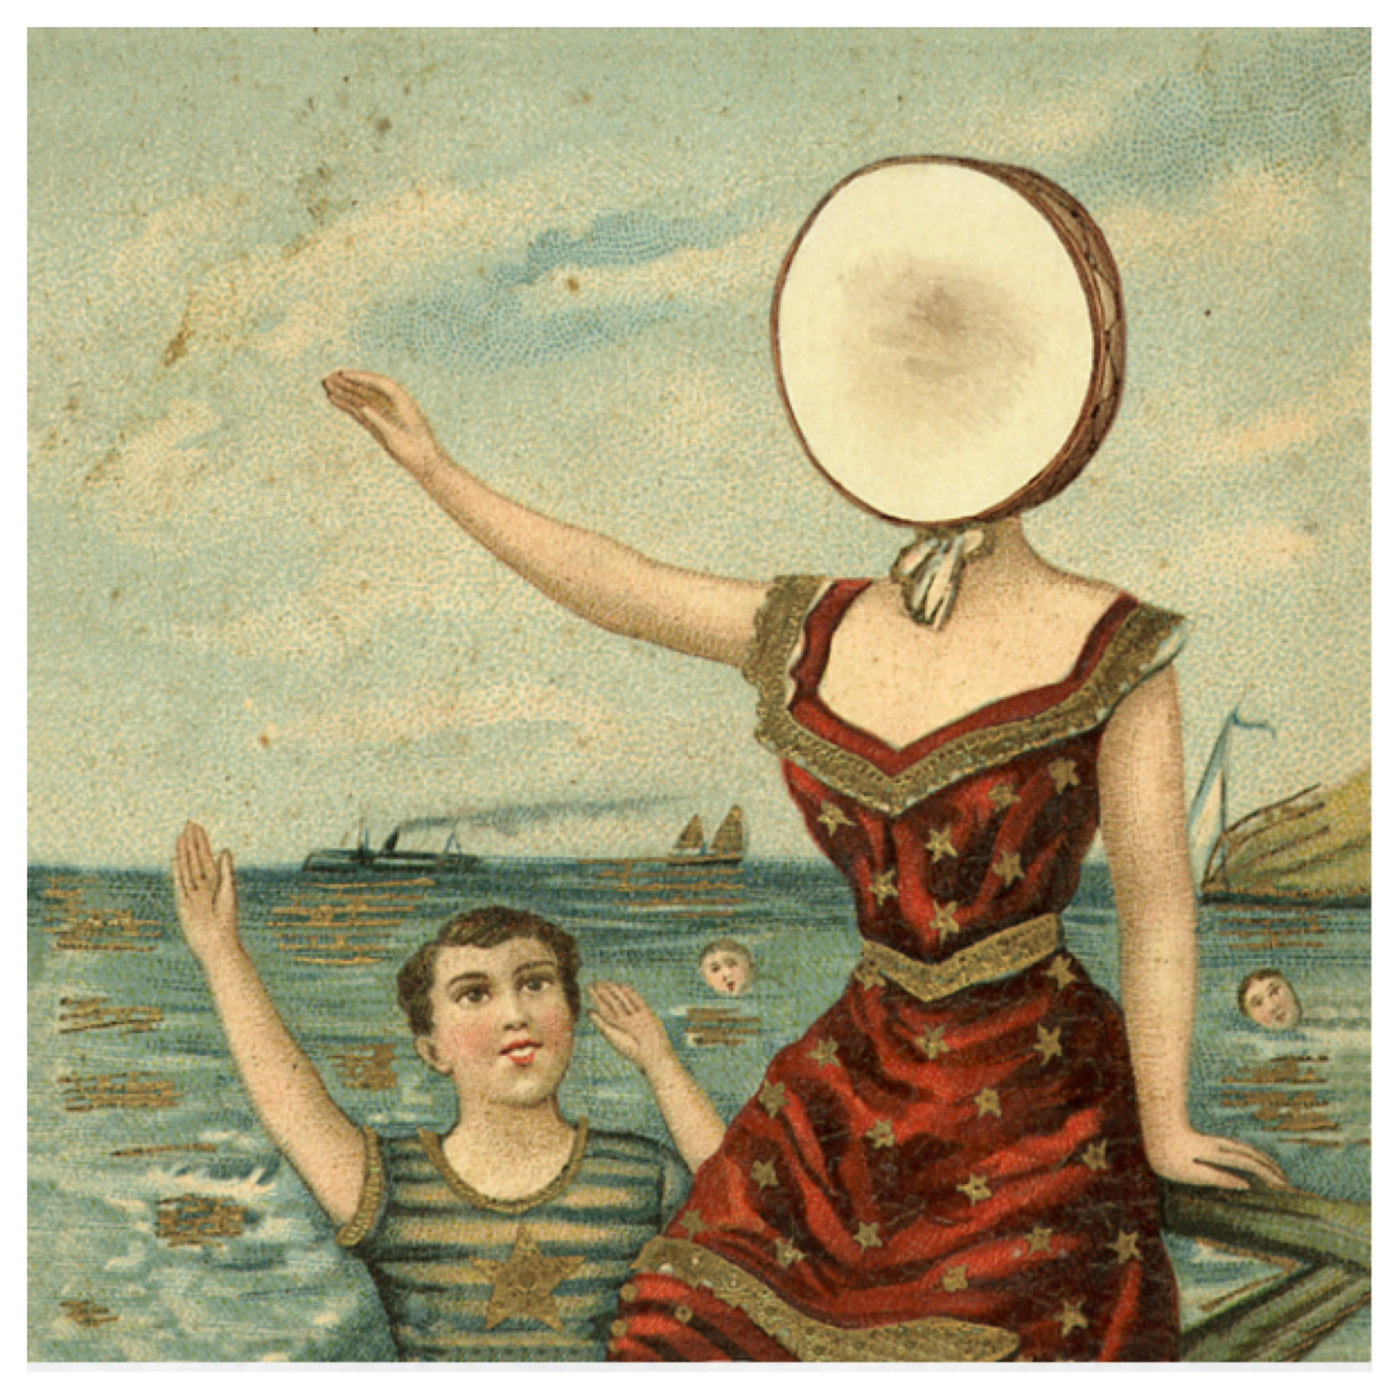 Neutral Milk Hotel - In an Aeroplane Over the Sea